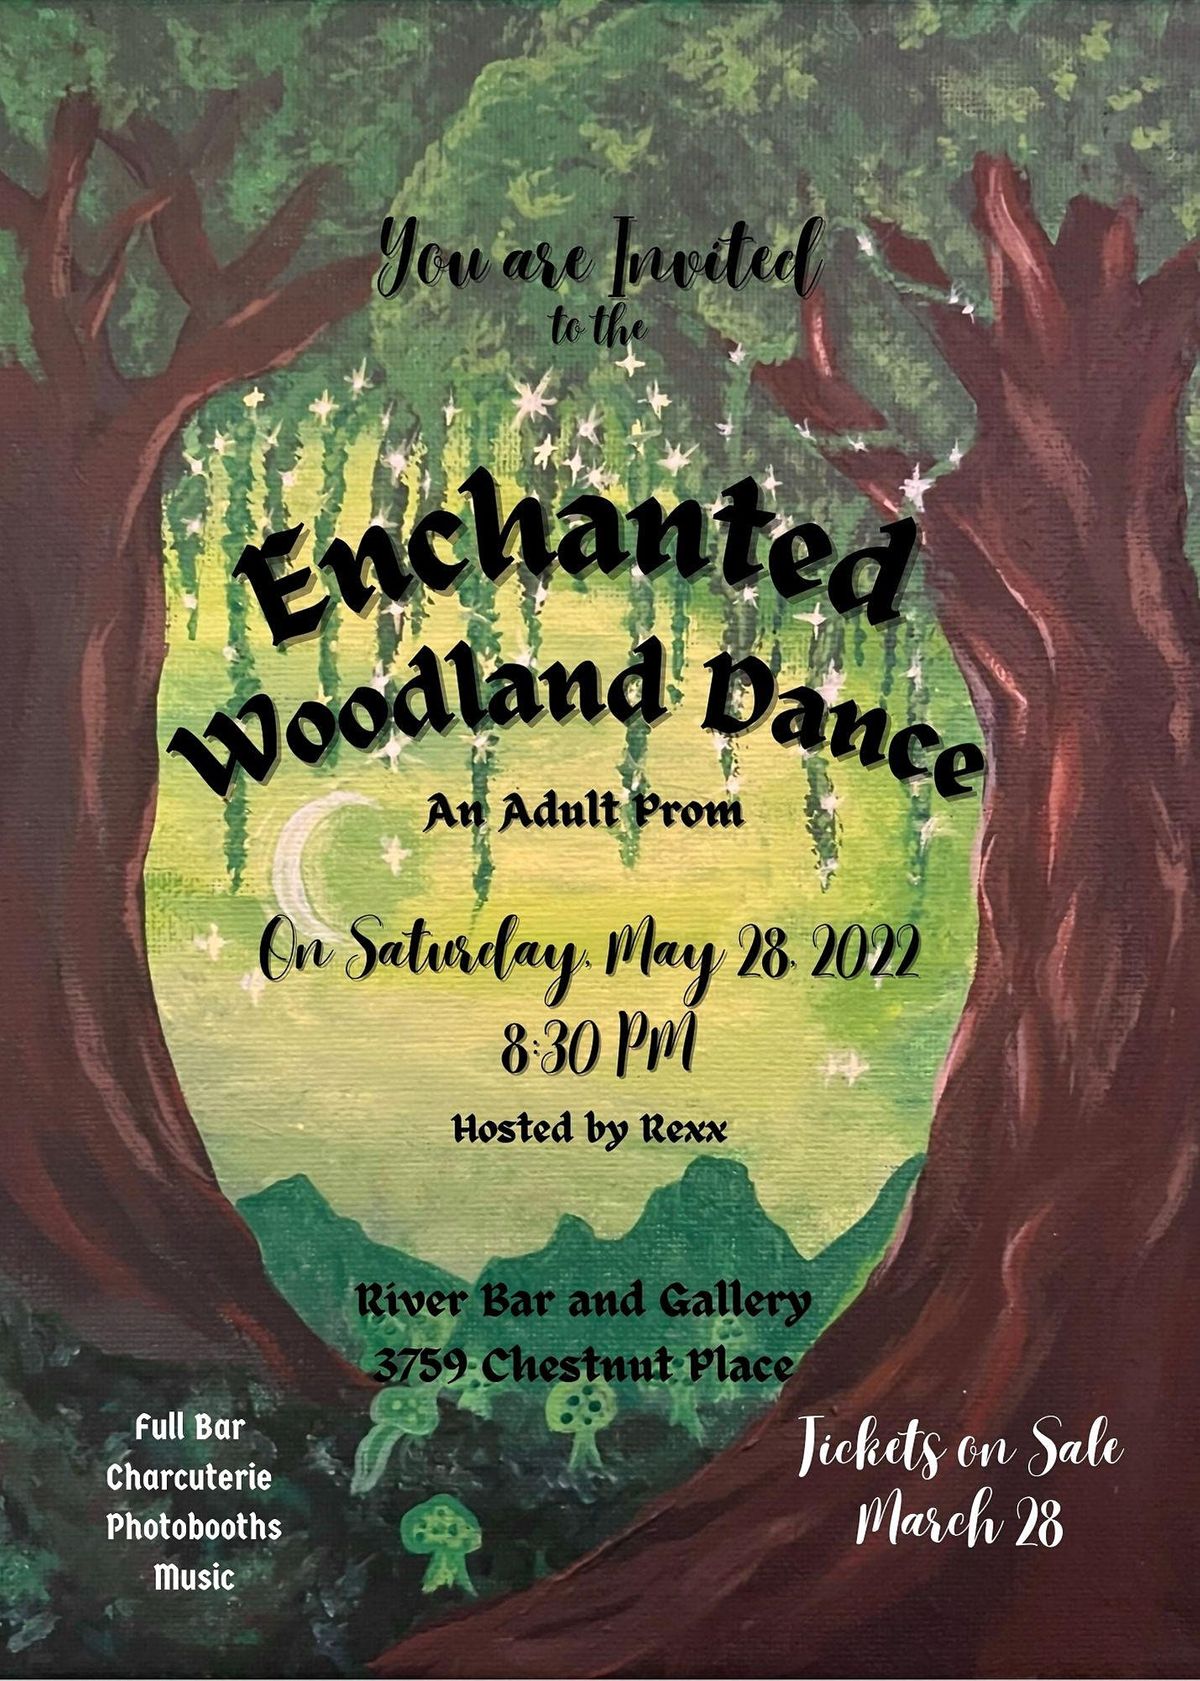 Enchanted Woodland Dance - An Adult Prom